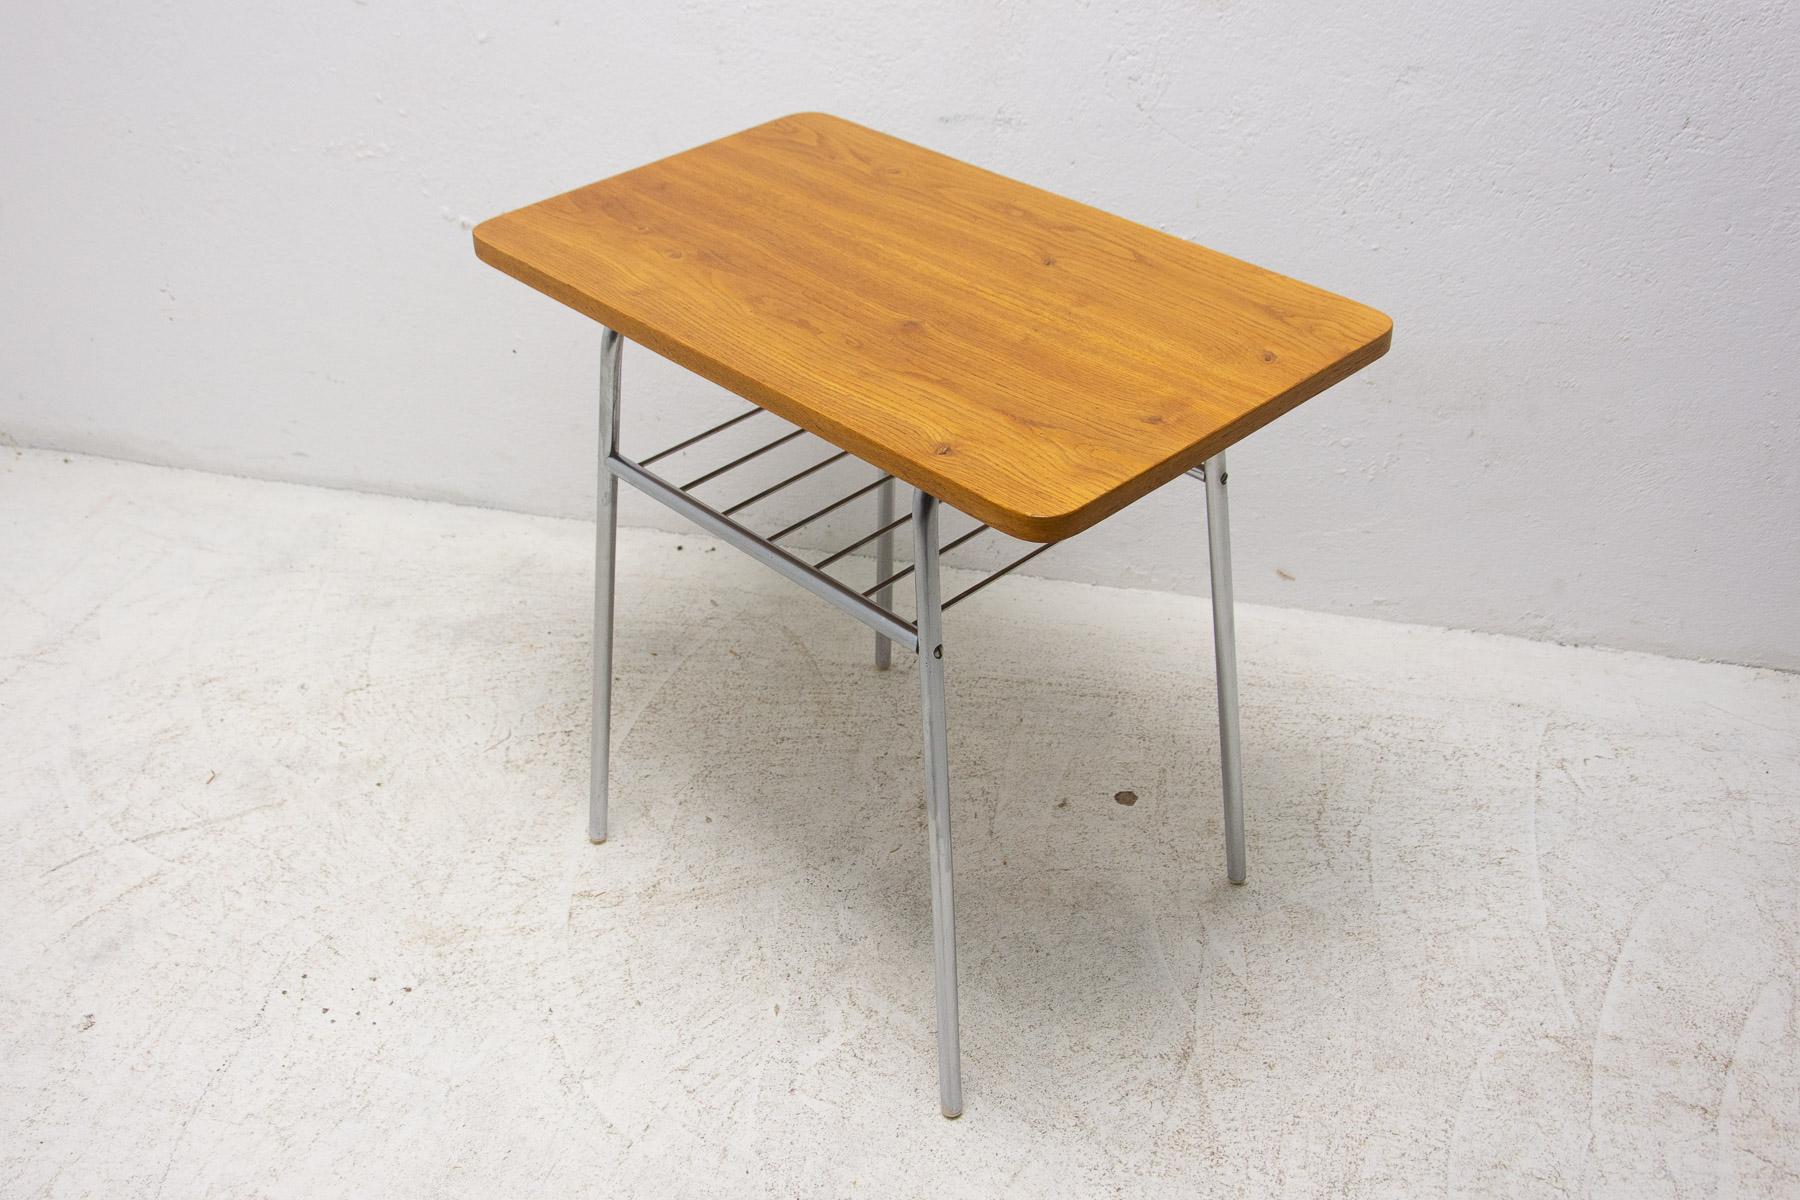 Plated Fully Renovated Chrome and Wood Side Table, 1950s, Czechoslovakia For Sale